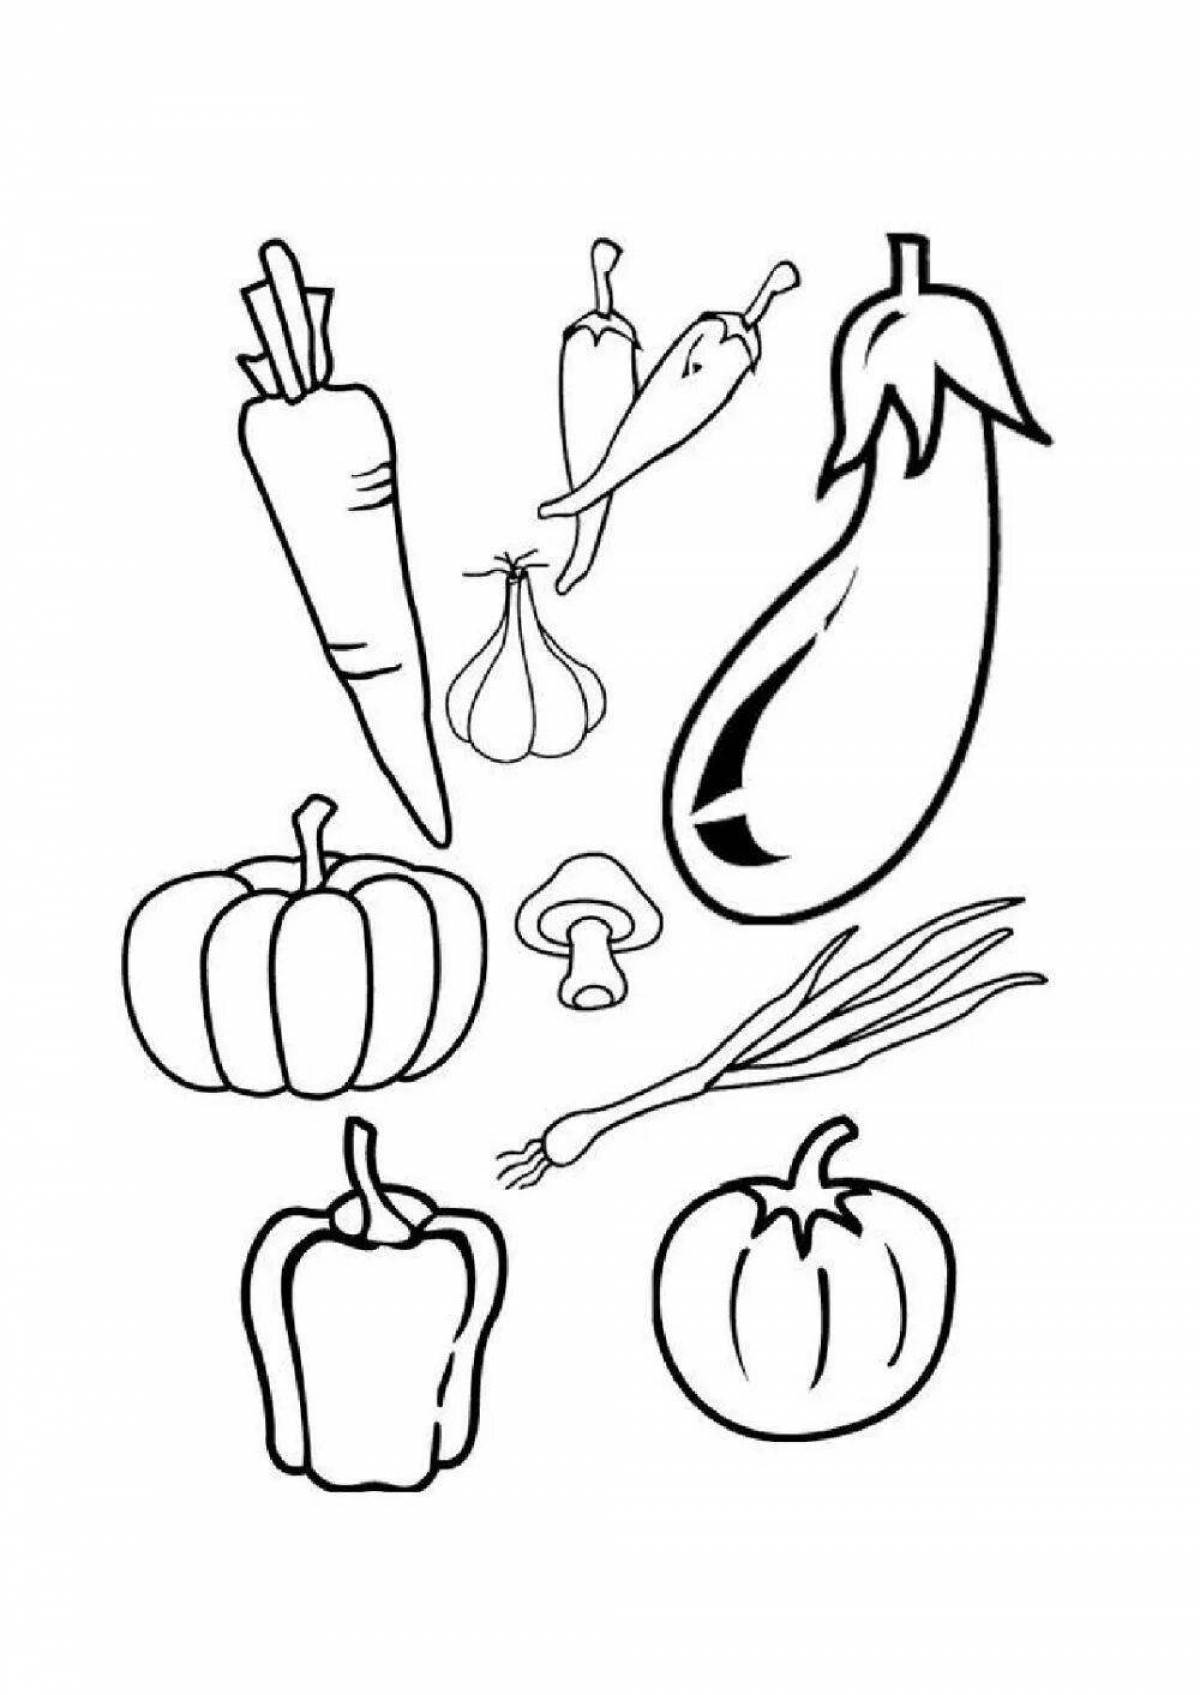 Interesting vegetable coloring book for children 3 years old